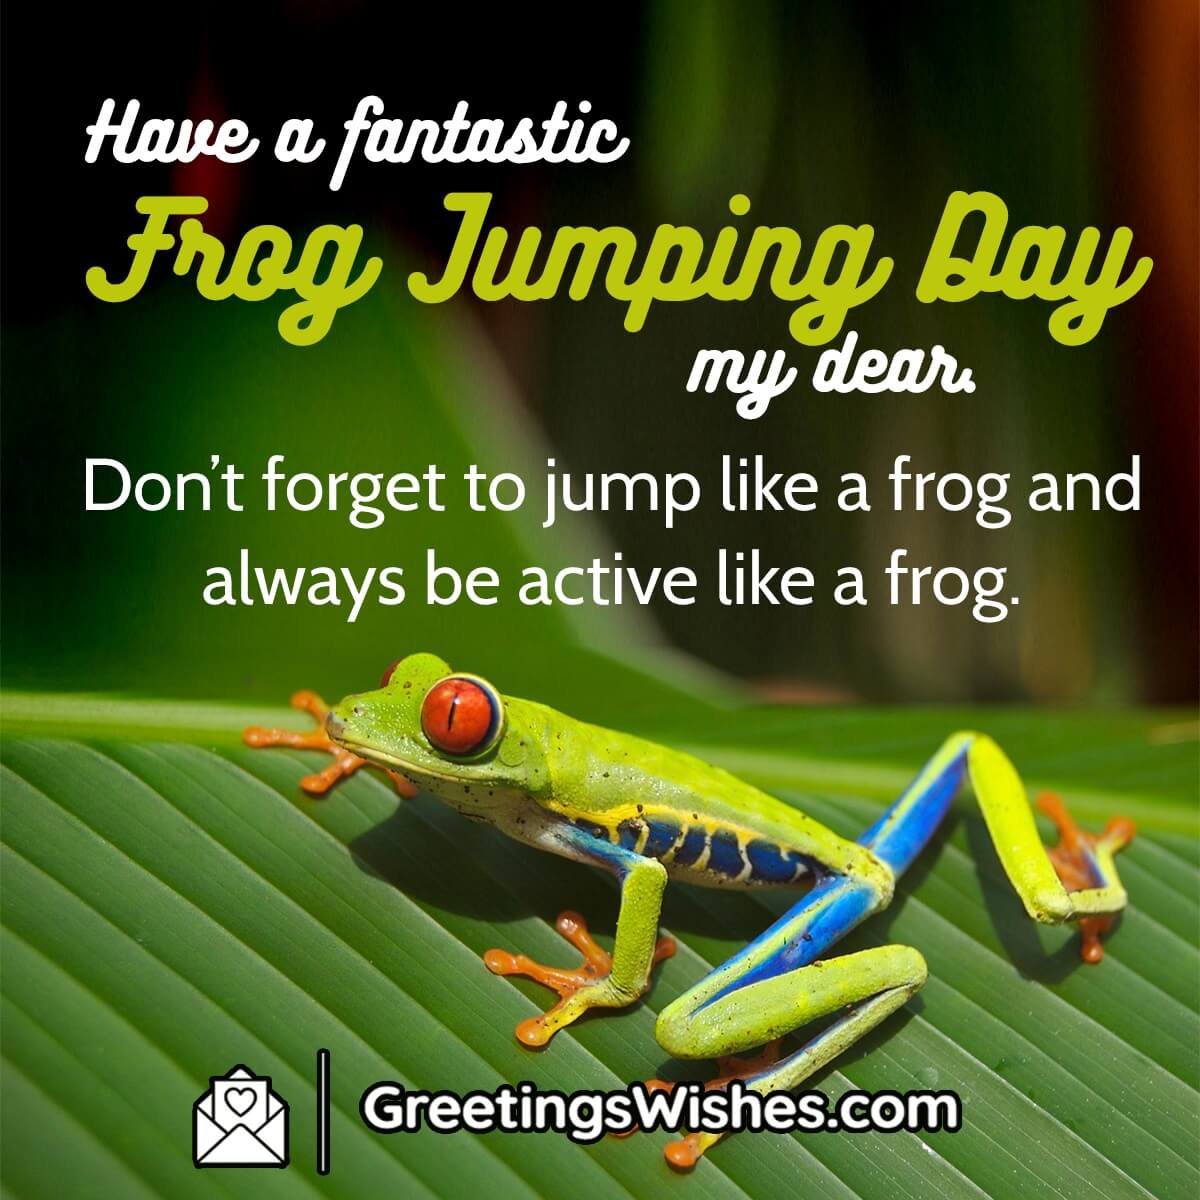 Frog Jumping Day Message